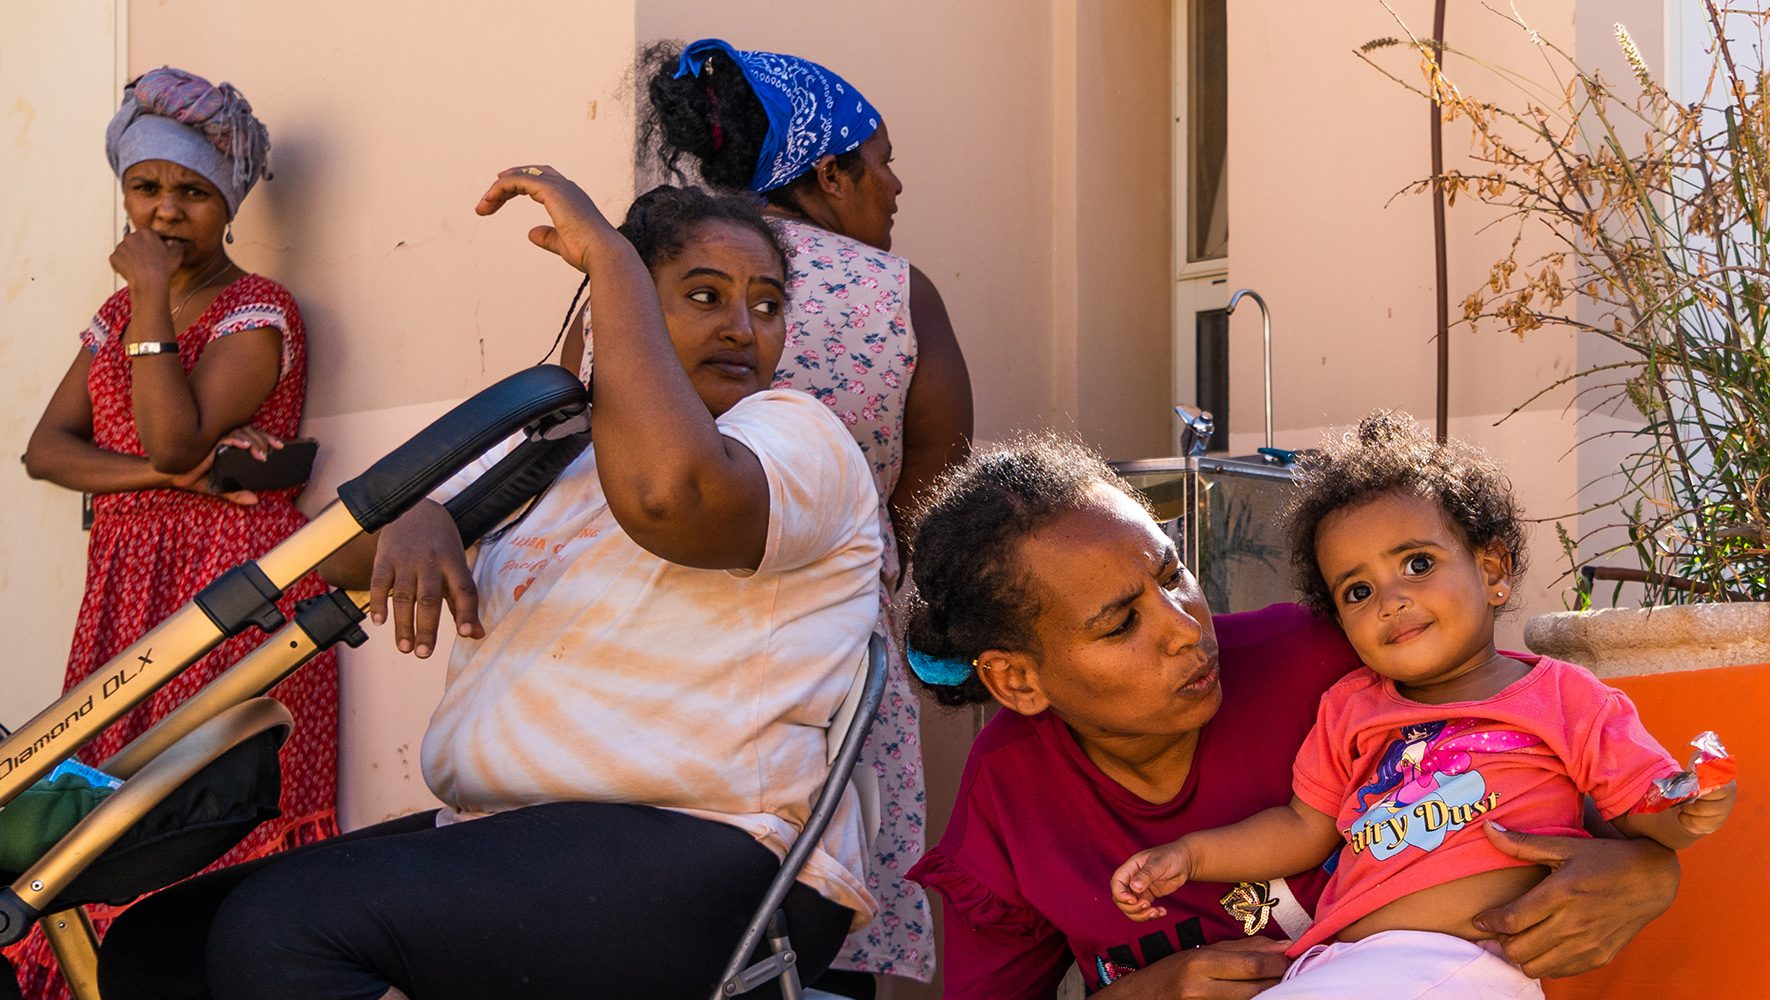 Photos: On the Ground in Israel, HIAS Assists the Displaced